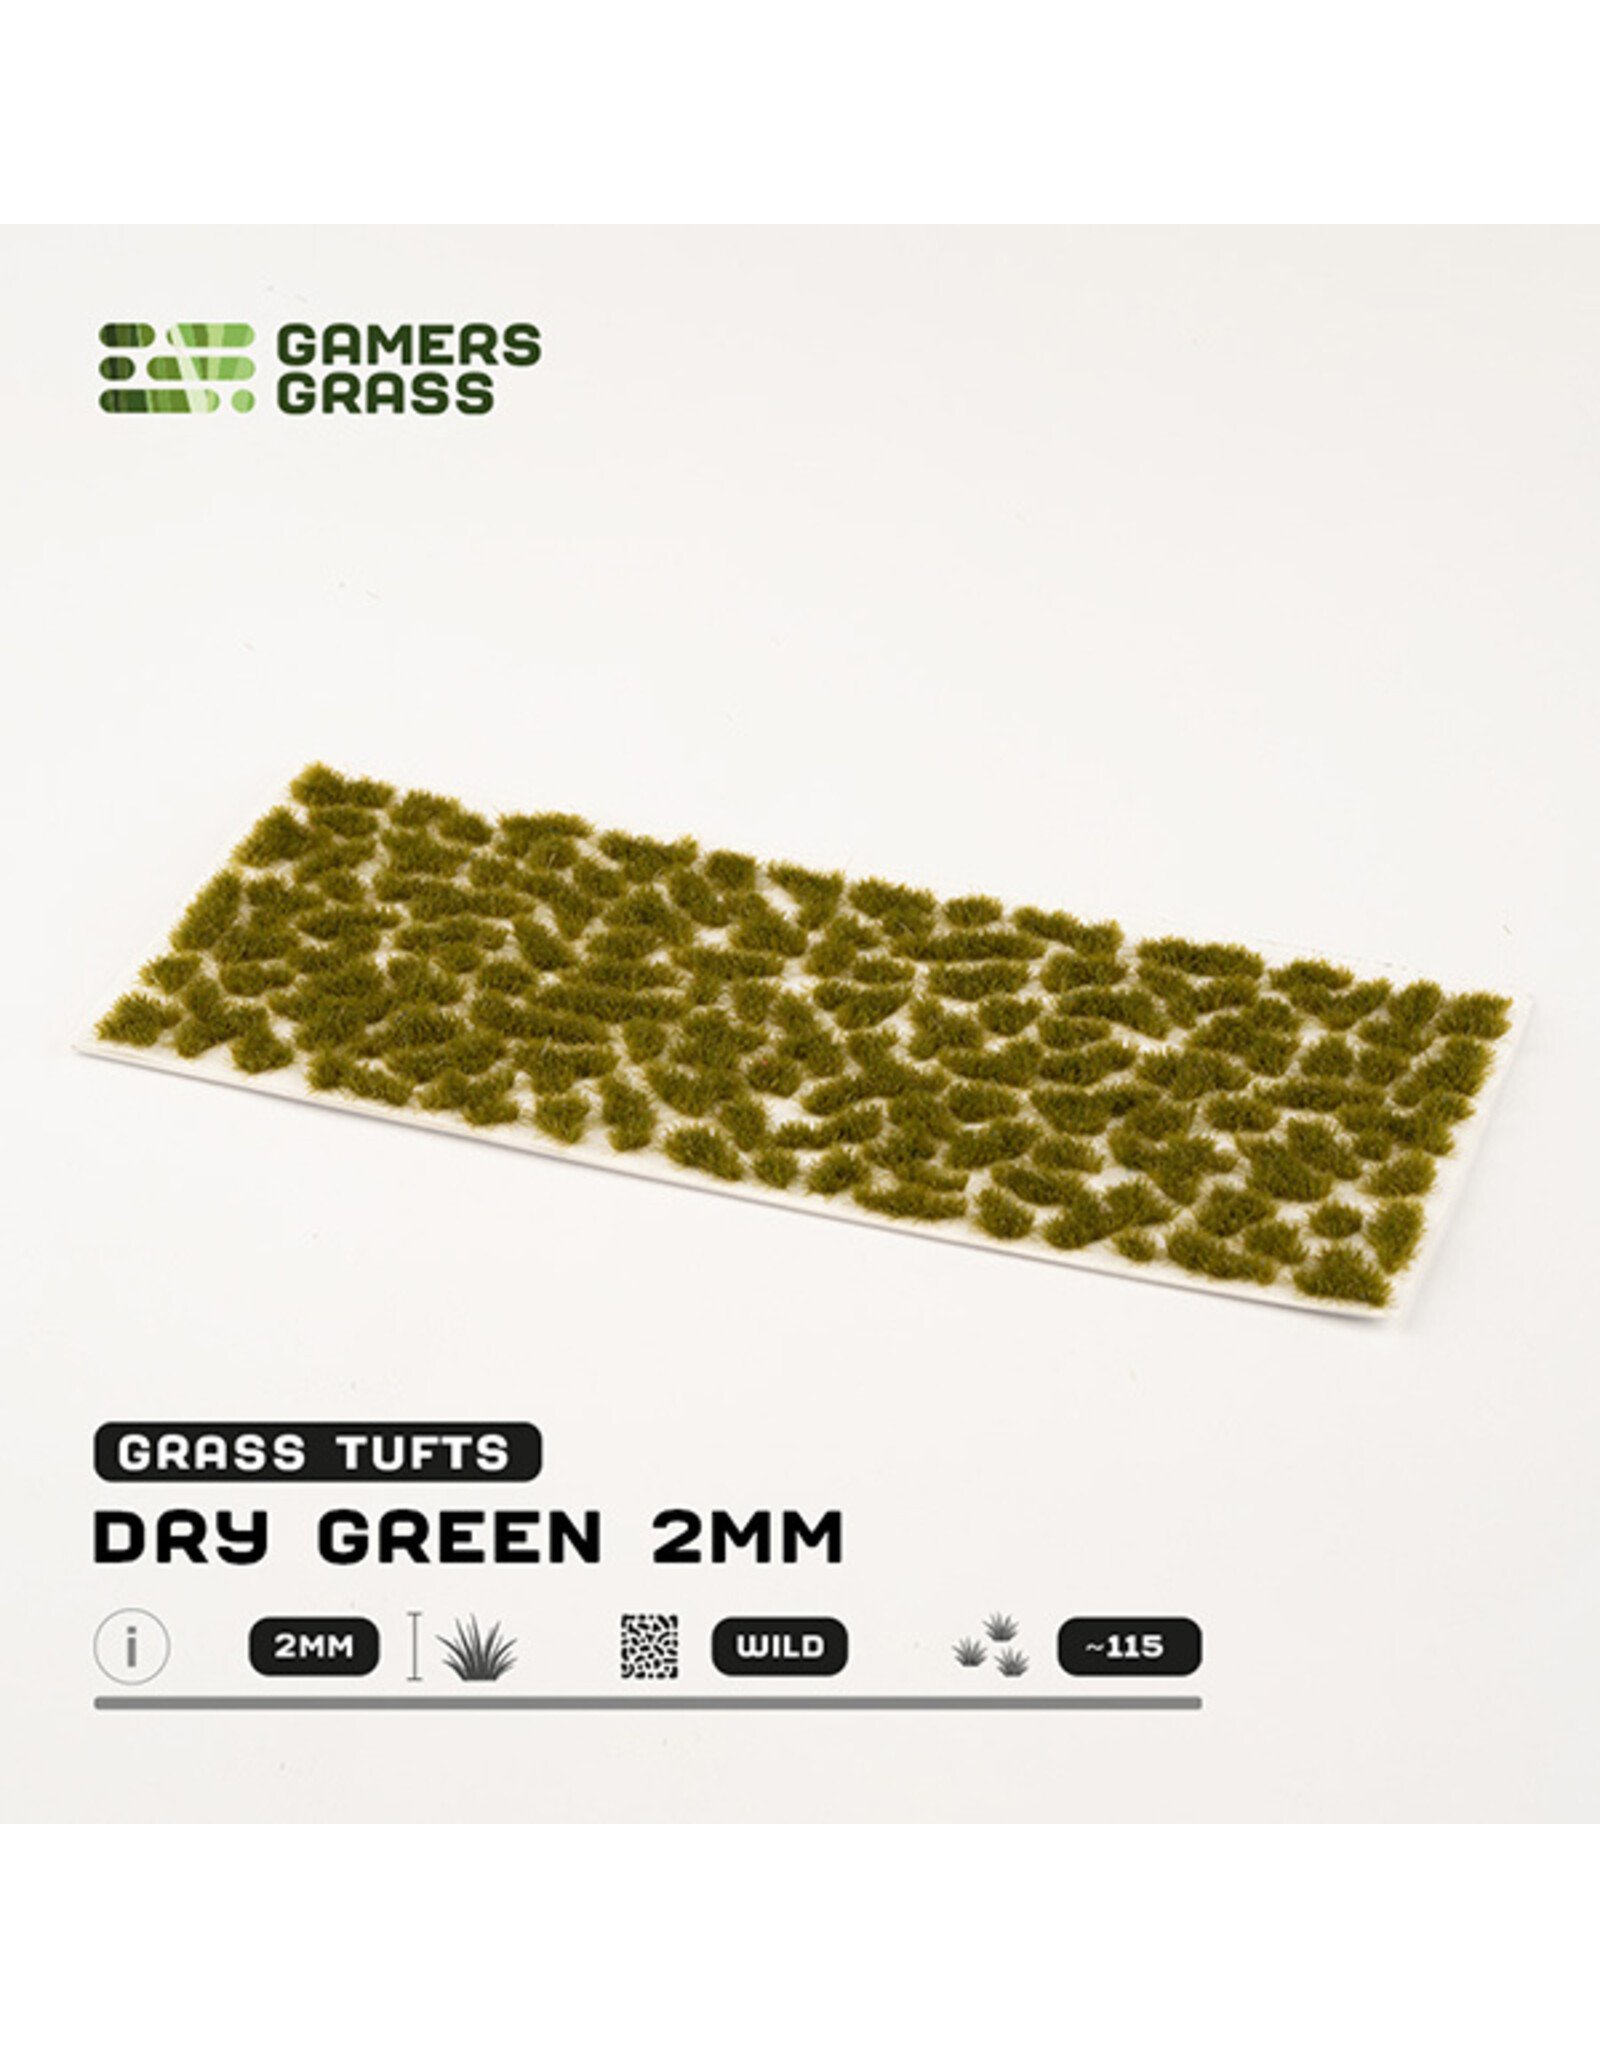 Gamers Grass Gamers Grass Tufts: Tufts- Dry Green 2mm- Wild